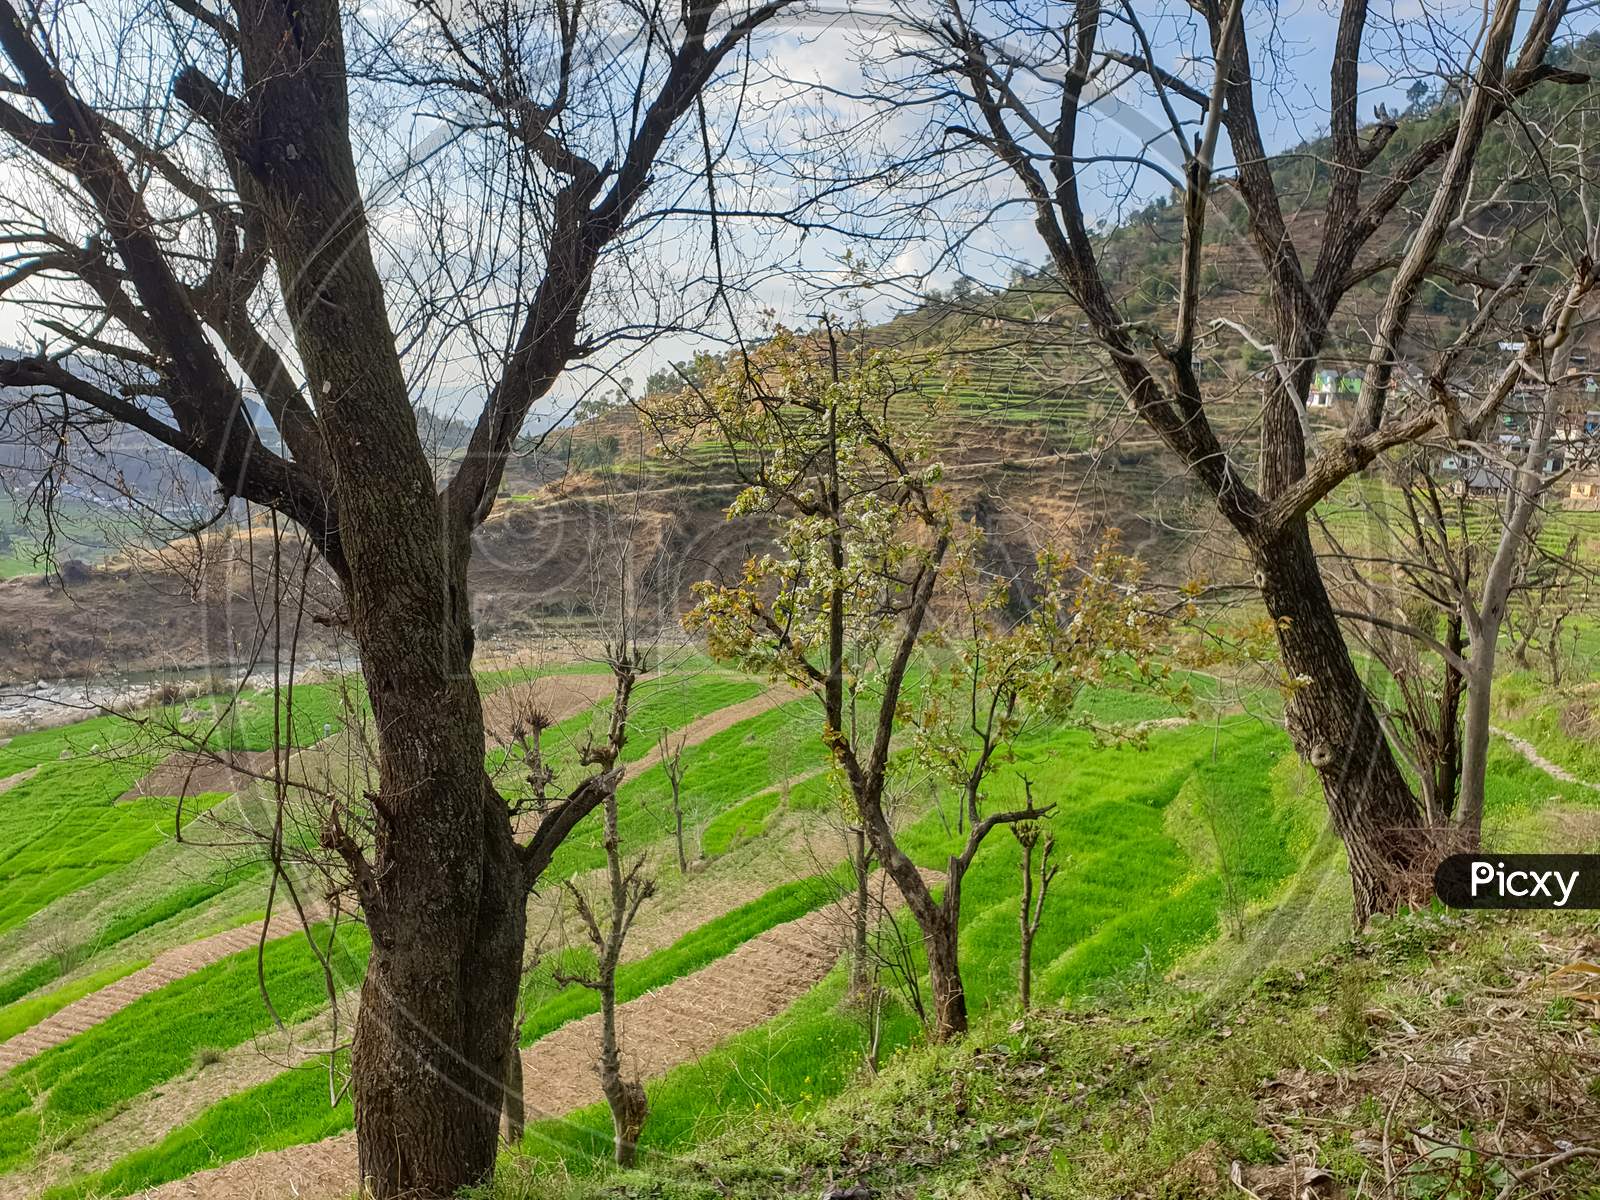 Capture of dry trees with terraced farm in background during spring season in hilly area of Himachal Pradesh, India